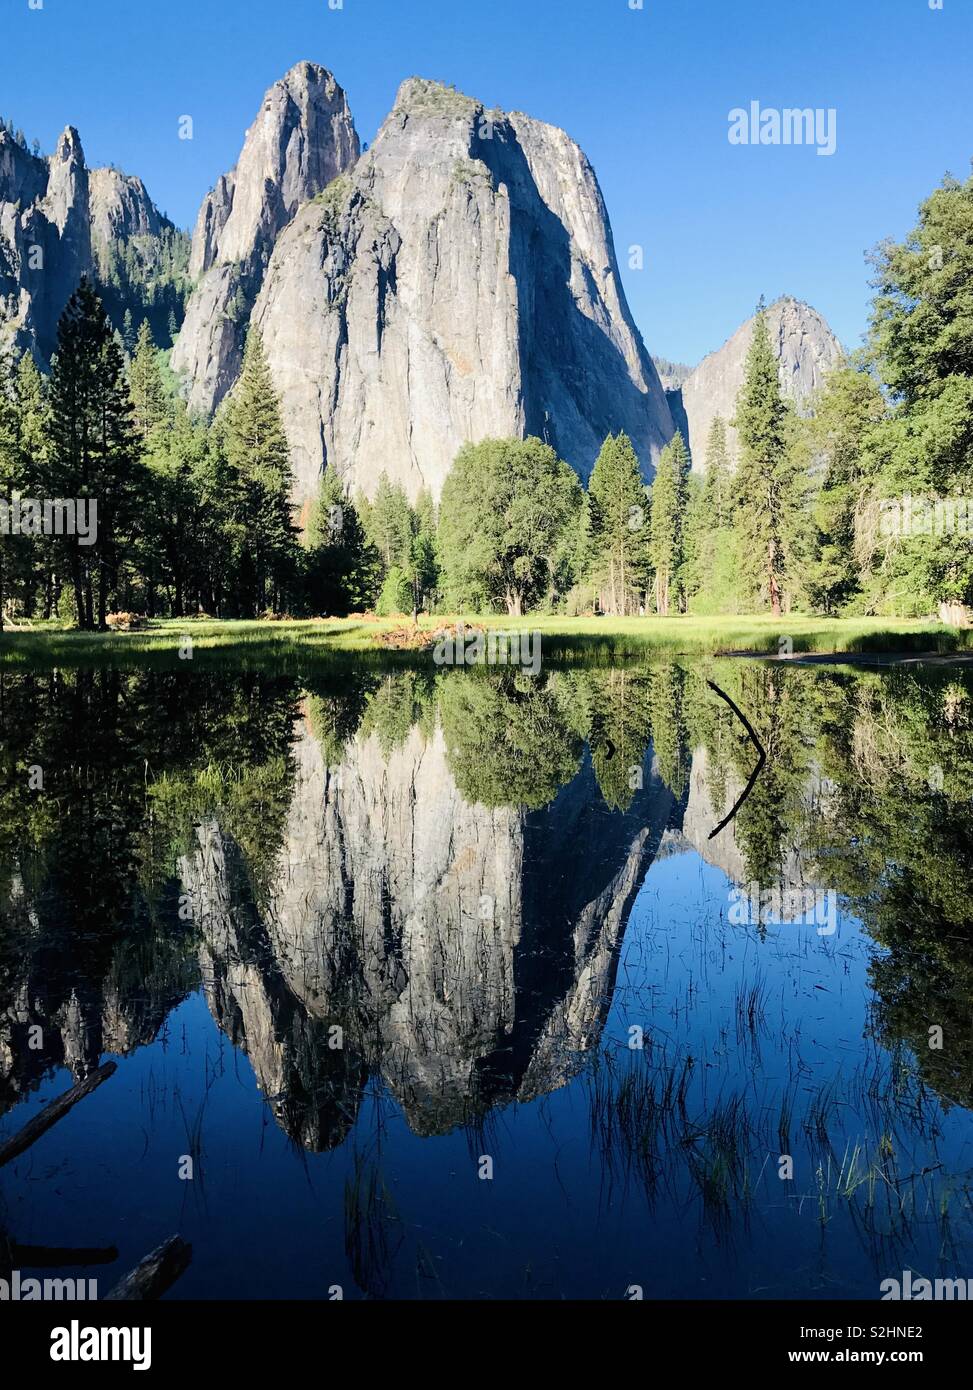 Sentinel Rock and the Yosemite Valley reflecting in the pond. Yosemite, California USA. Stock Photo